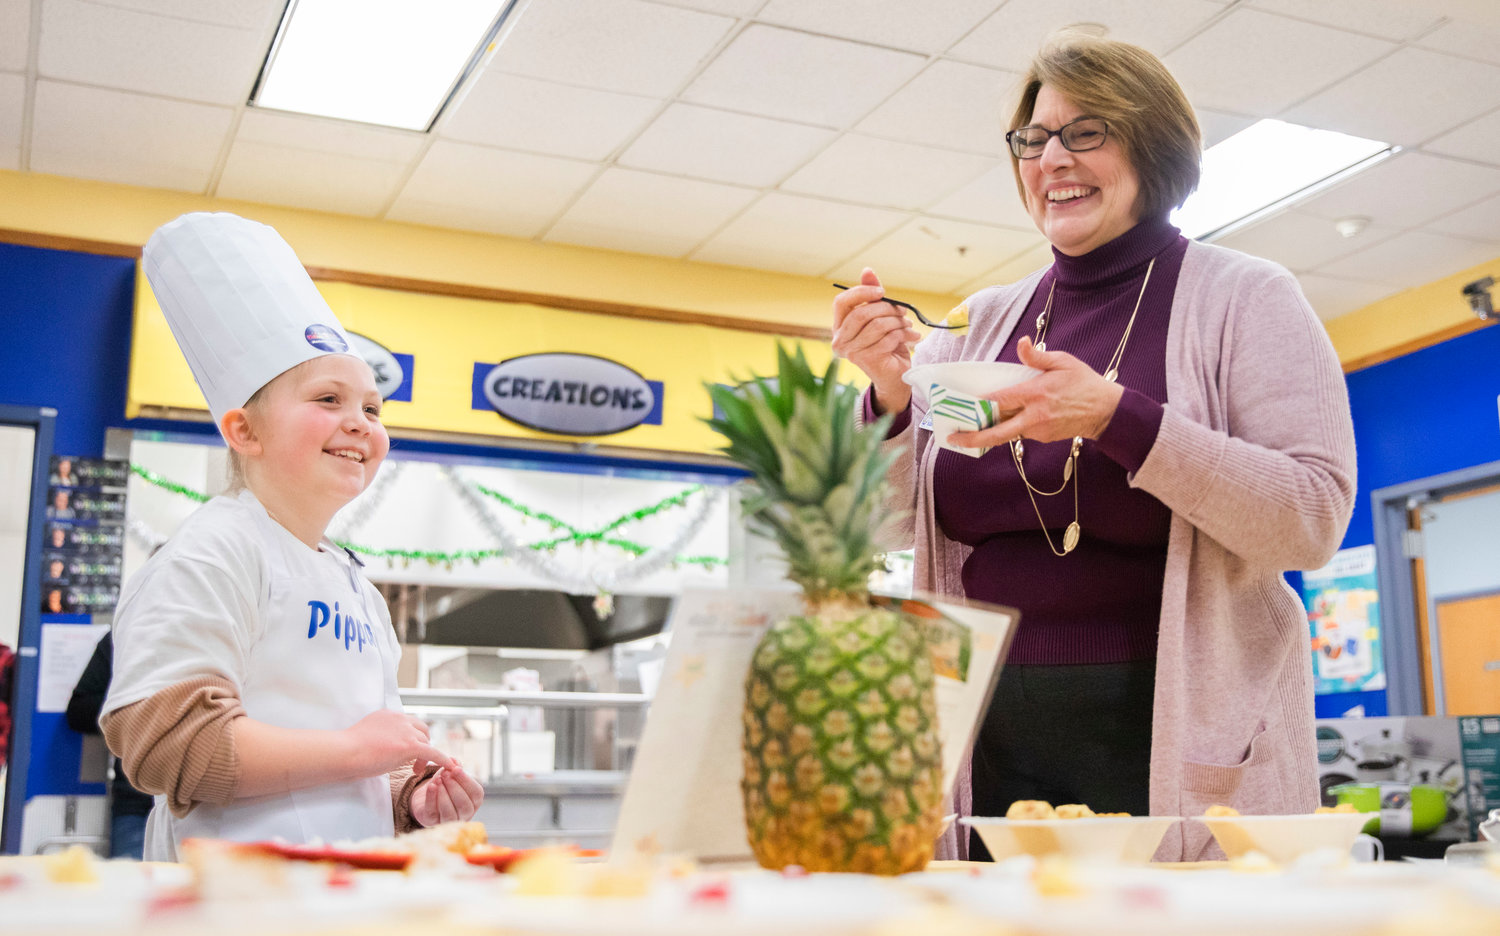 Pippa Haggerty, a third grader at Grand Mound Elementary, took second place with “Cinnamon Fried Pineapples” during a Future Chefs Competition in Rochester on Thursday.